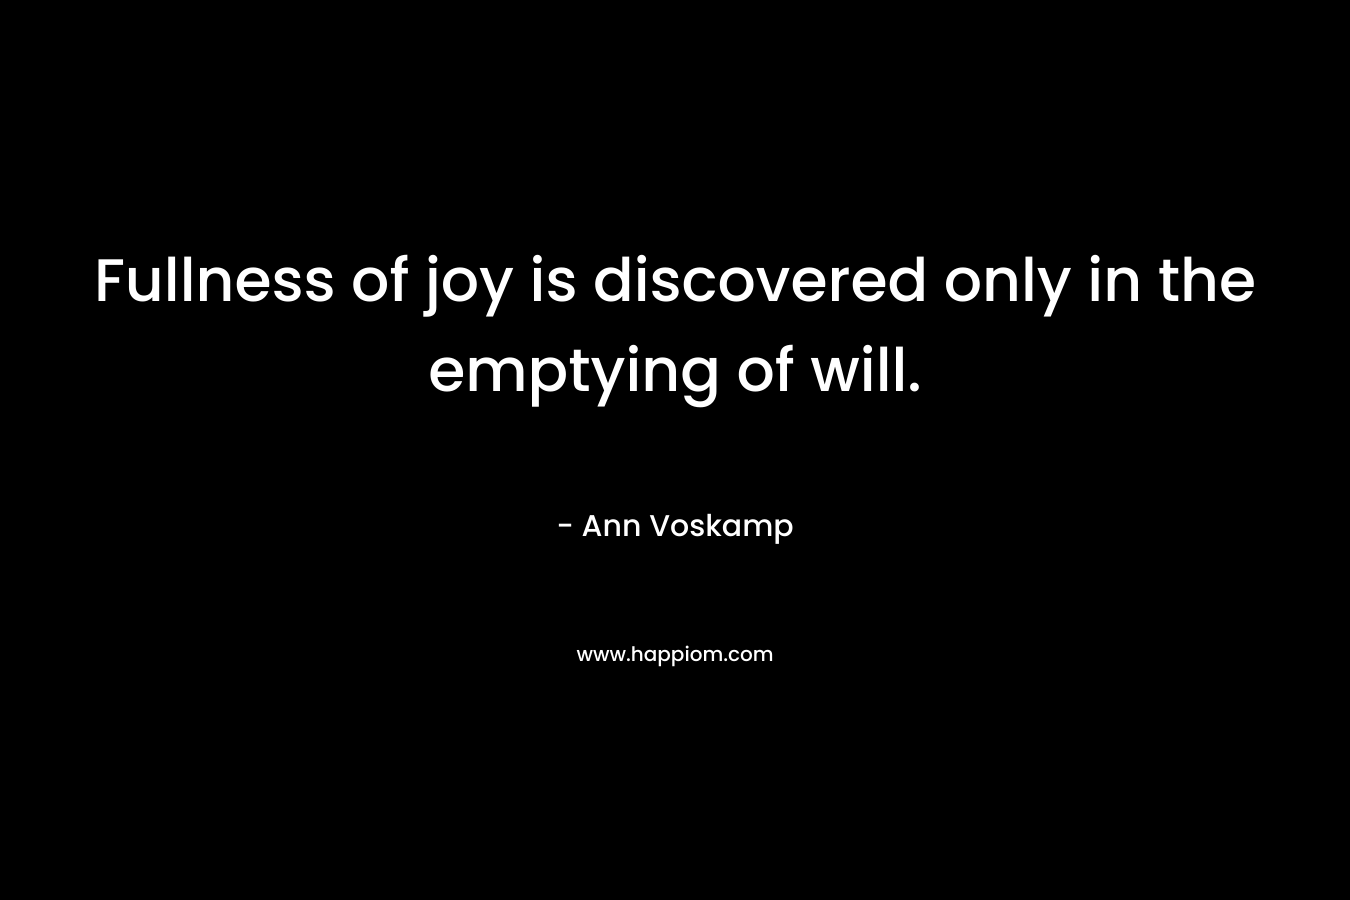 Fullness of joy is discovered only in the emptying of will.